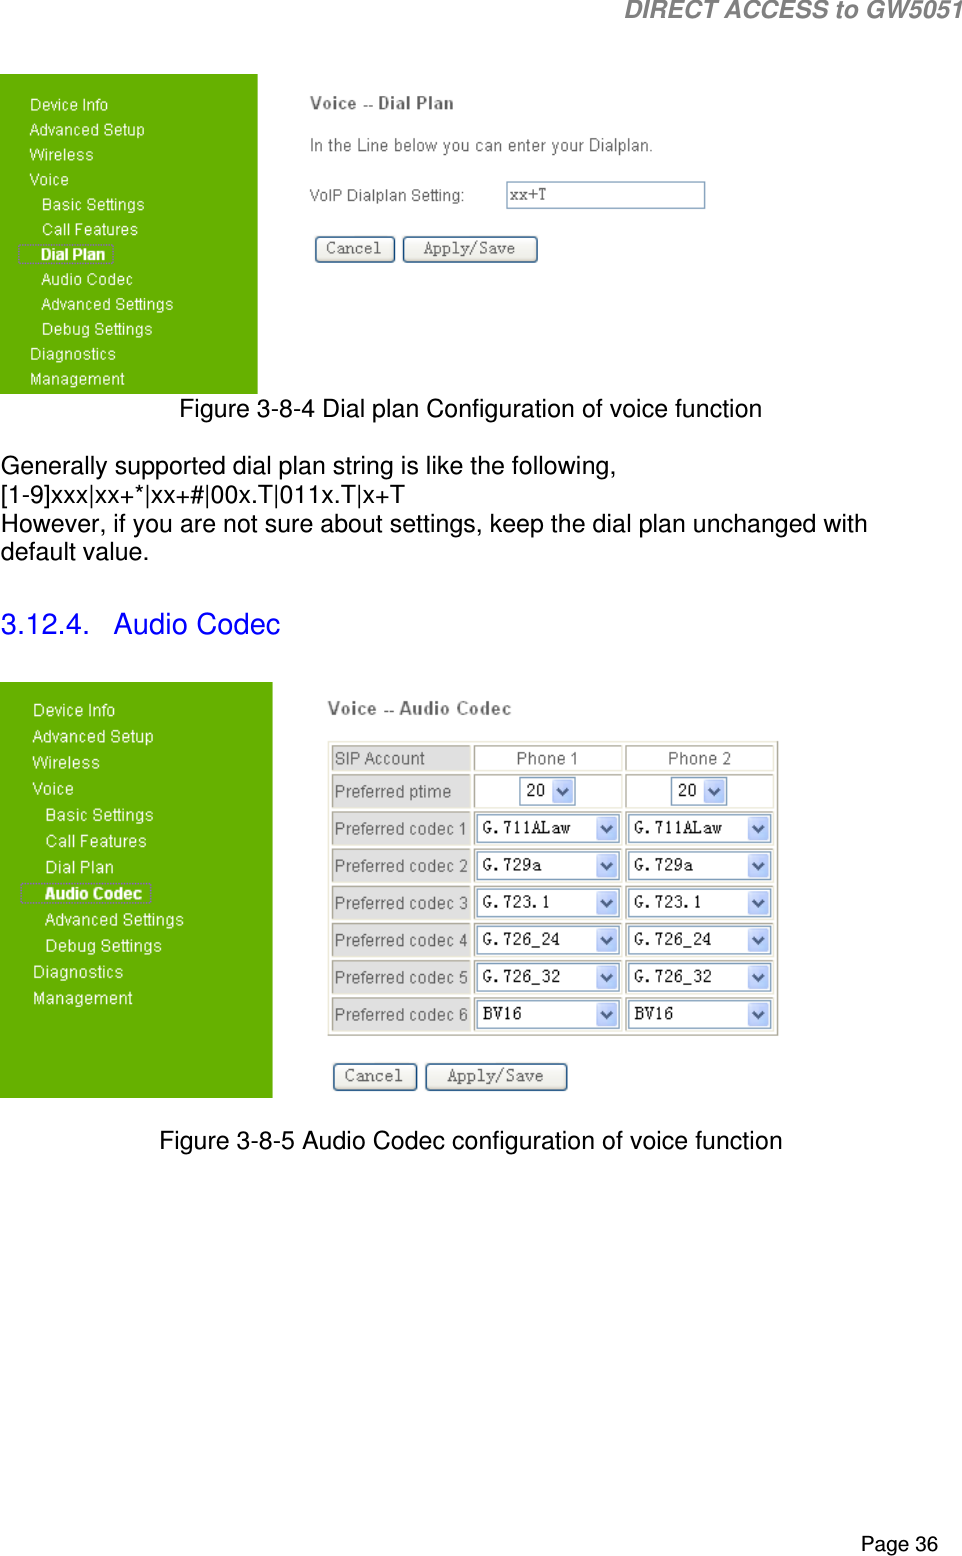                                                                                                                                                                                                                           DIRECT ACCESS to GW5051    Page 36   Figure 3-8-4 Dial plan Configuration of voice function  Generally supported dial plan string is like the following, [1-9]xxx|xx+*|xx+#|00x.T|011x.T|x+T However, if you are not sure about settings, keep the dial plan unchanged with default value.  3.12.4.  Audio Codec    Figure 3-8-5 Audio Codec configuration of voice function 